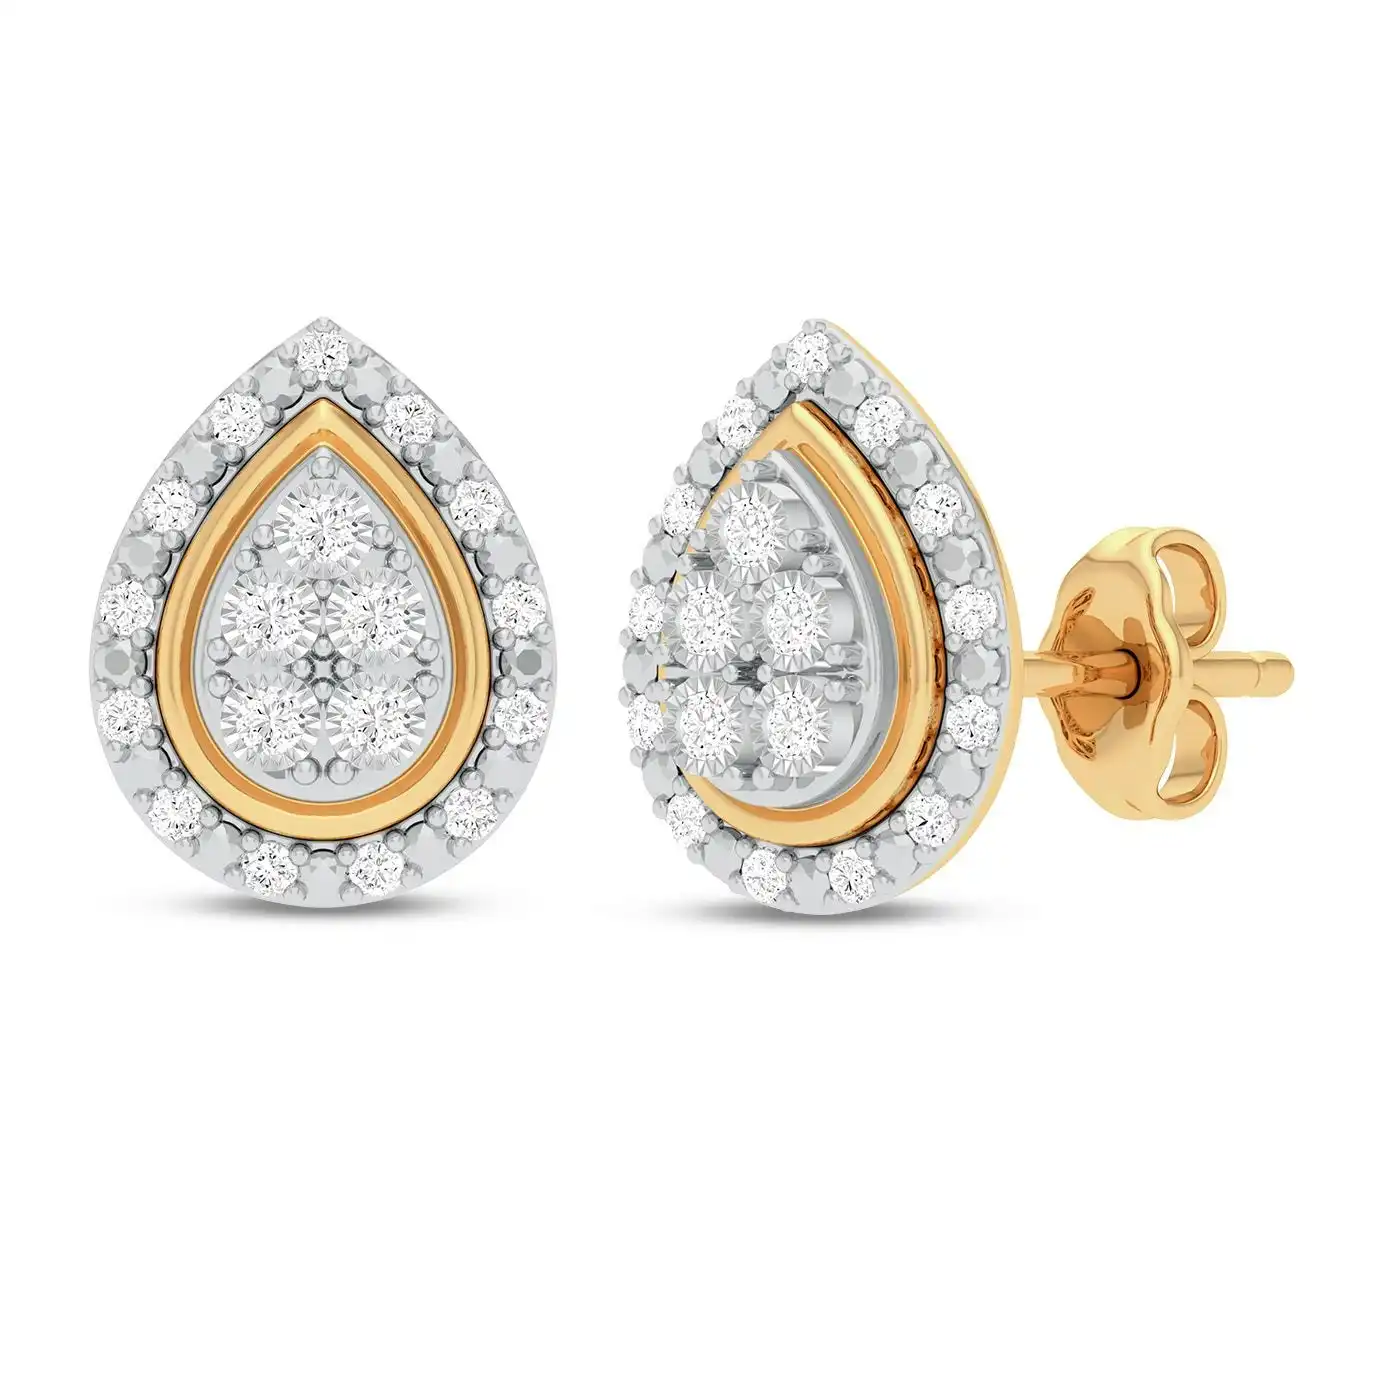 Pear Shape Halo Earrings with 0.15ct of Diamonds in 9ct Yellow Gold